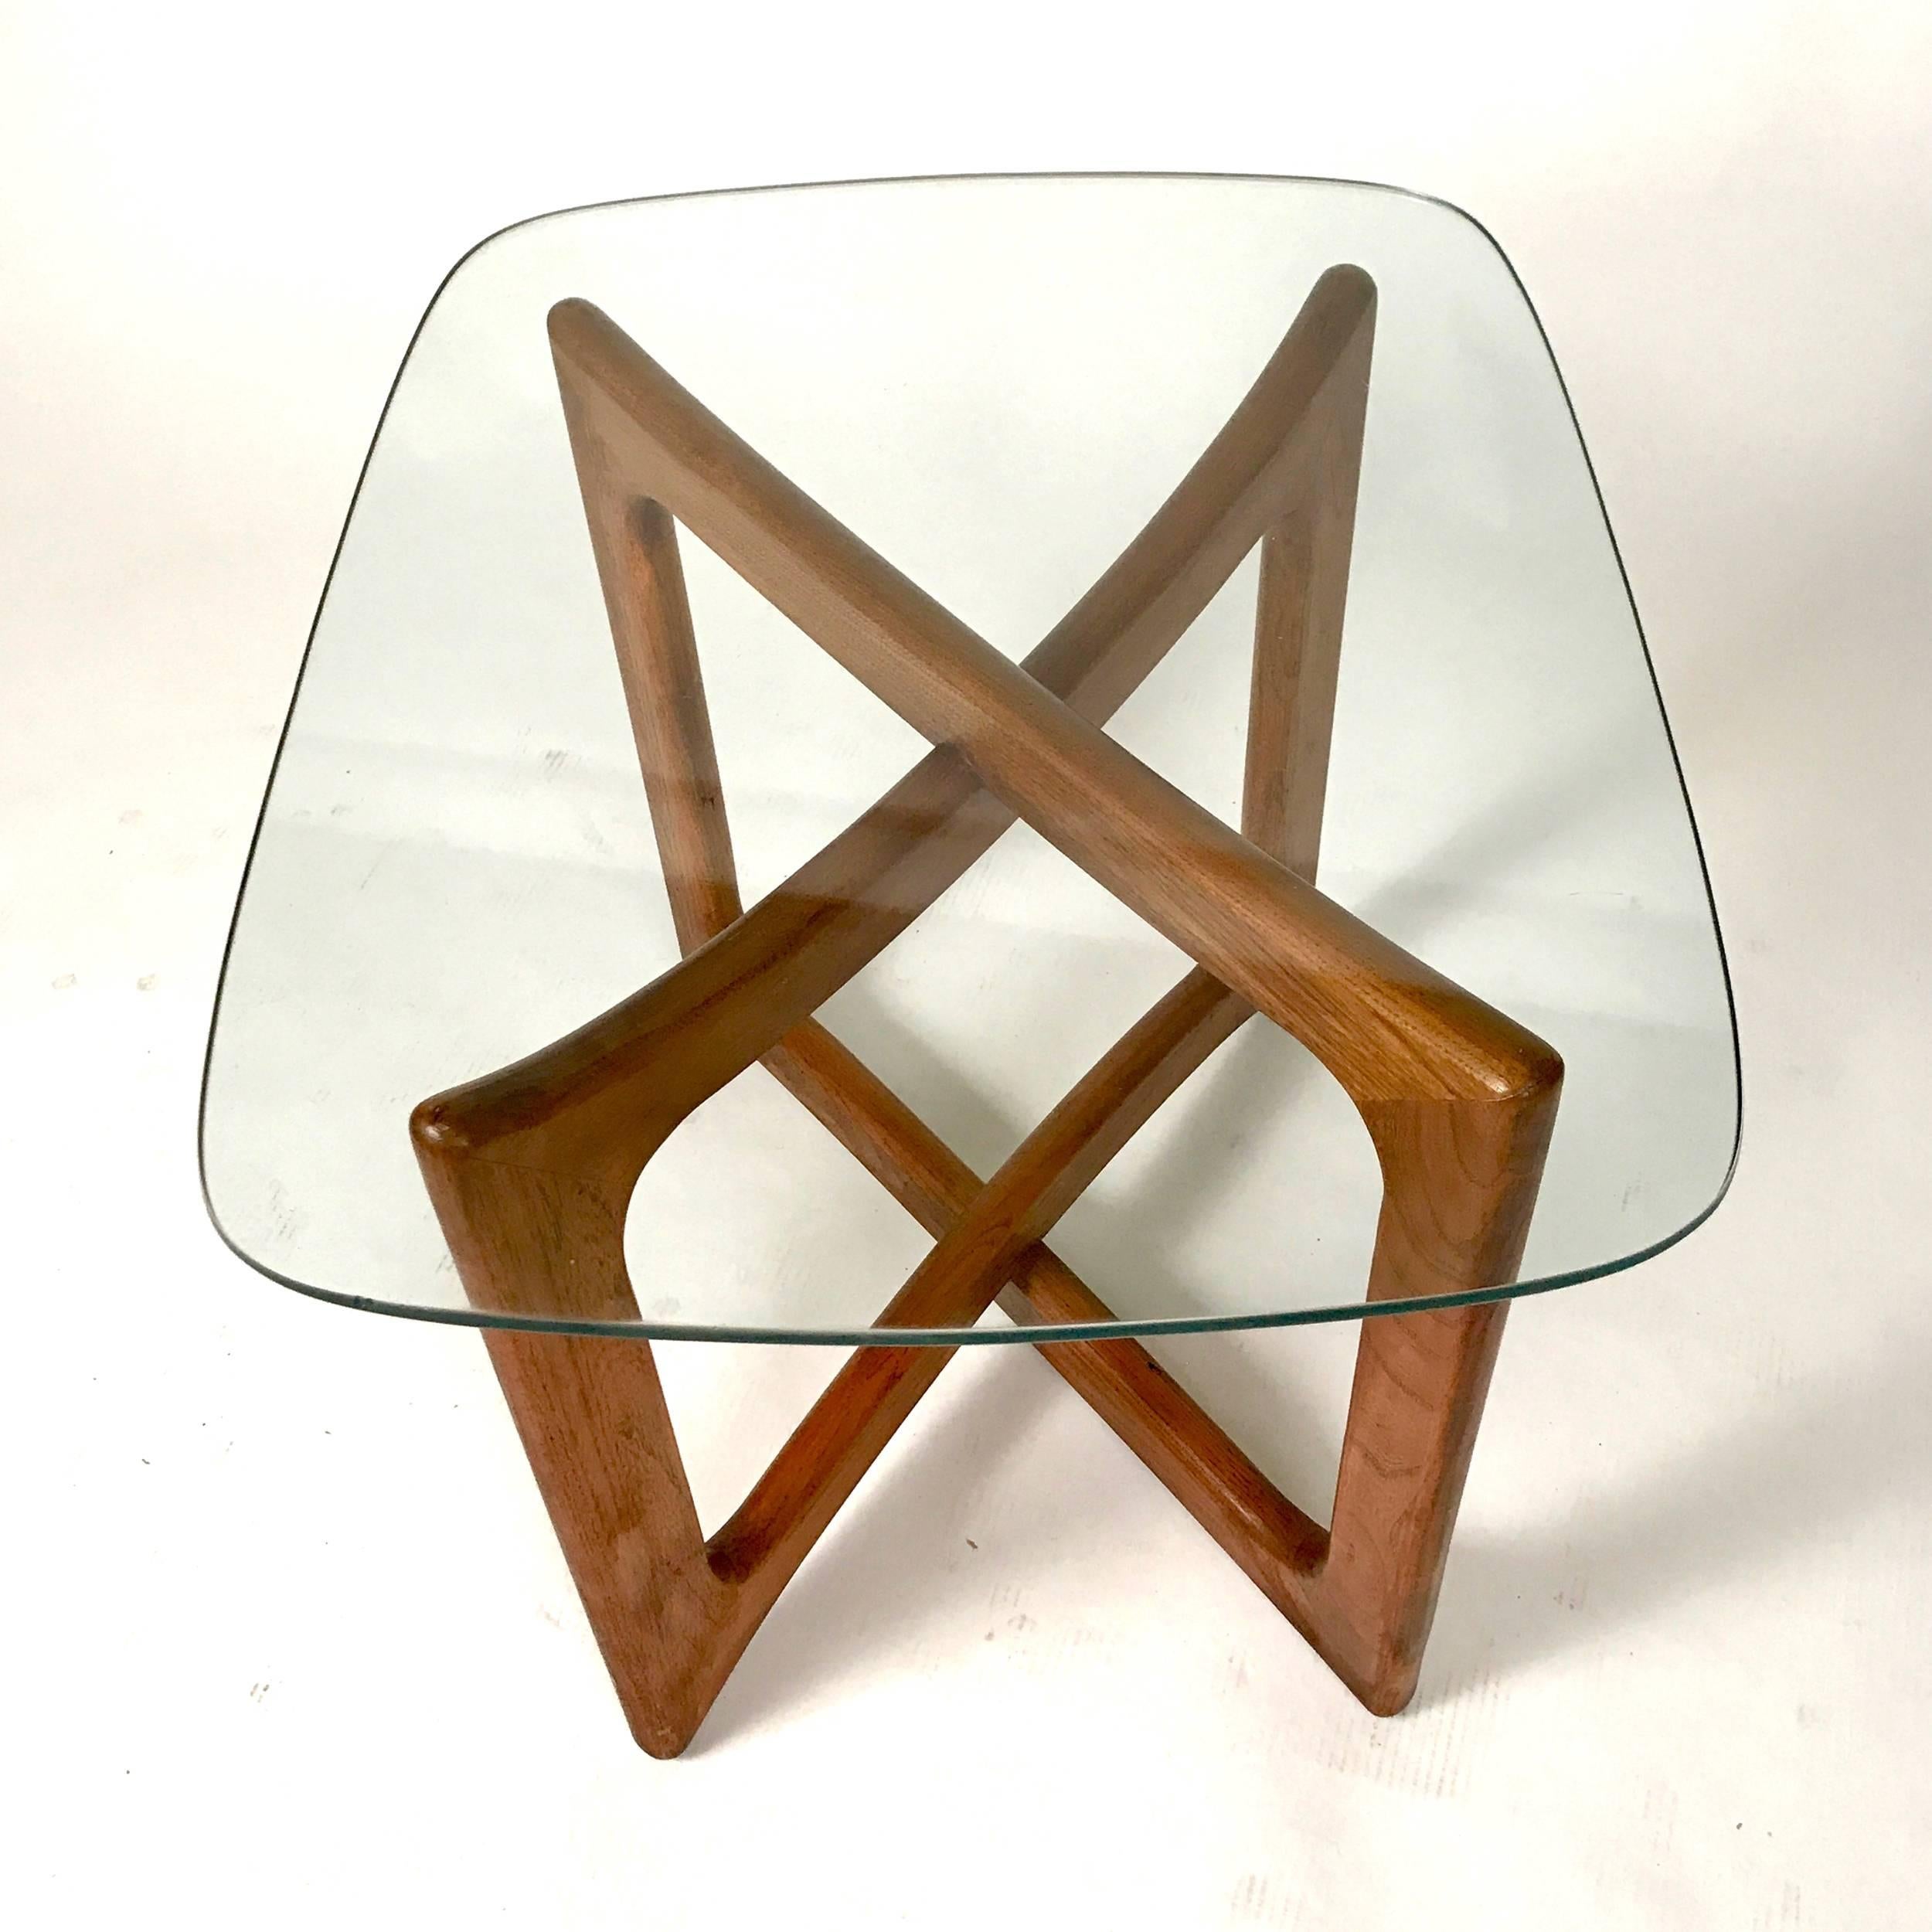 Gorgeous Mid-Century Modern sculptural walnut base with glass top table. Designed by Adrian Pearsall for Craft Associates.